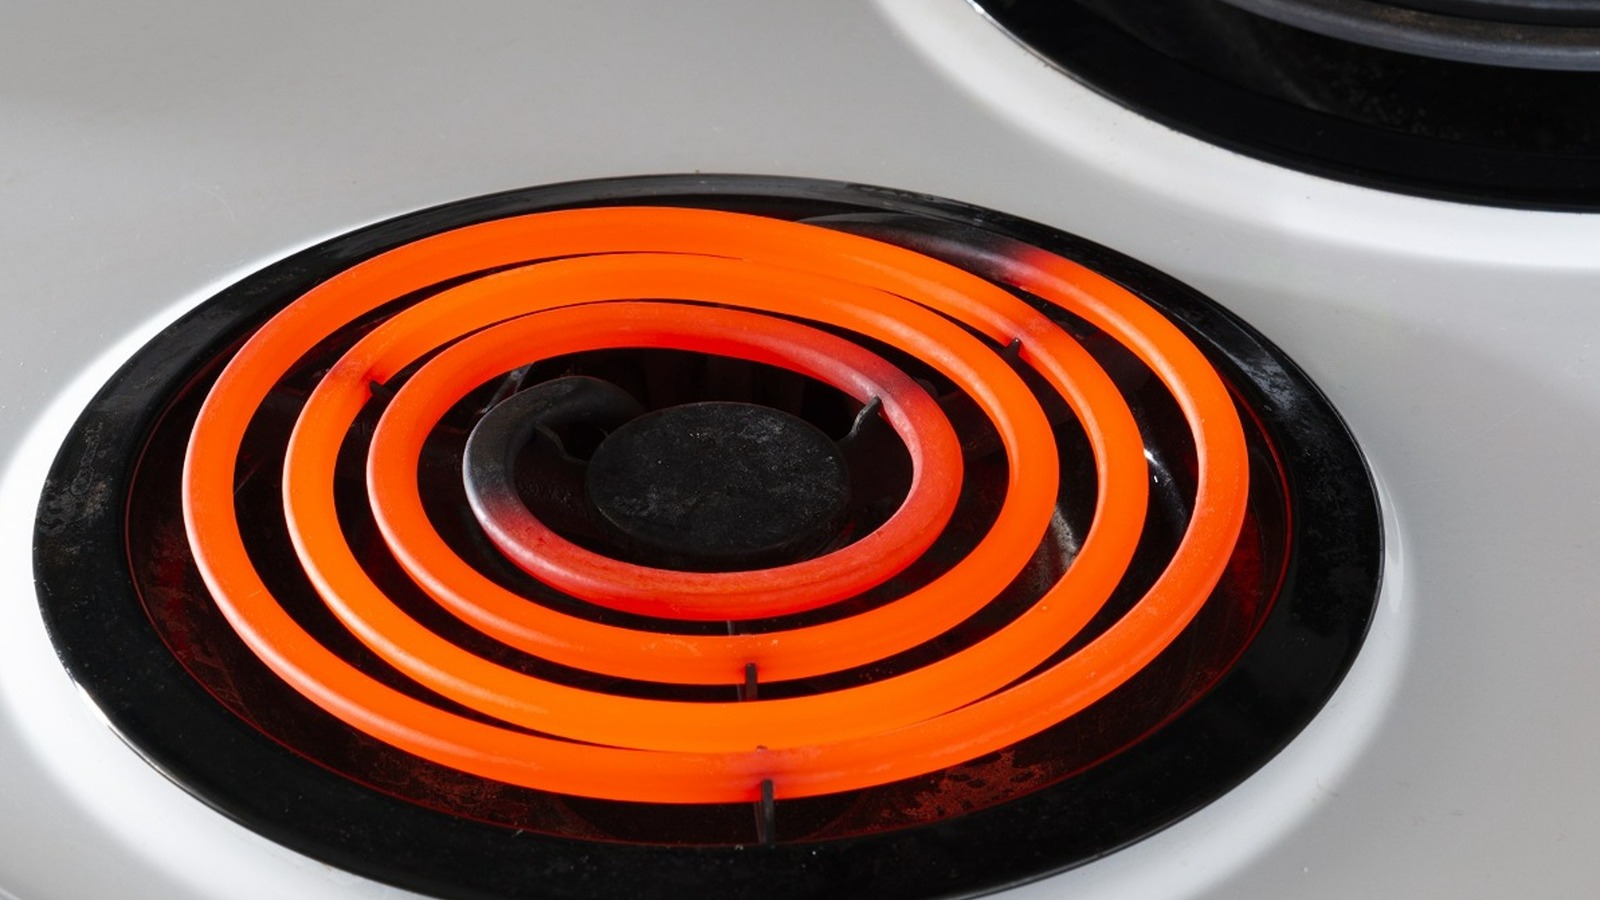 How to Clean Your Stove's Drip Pans